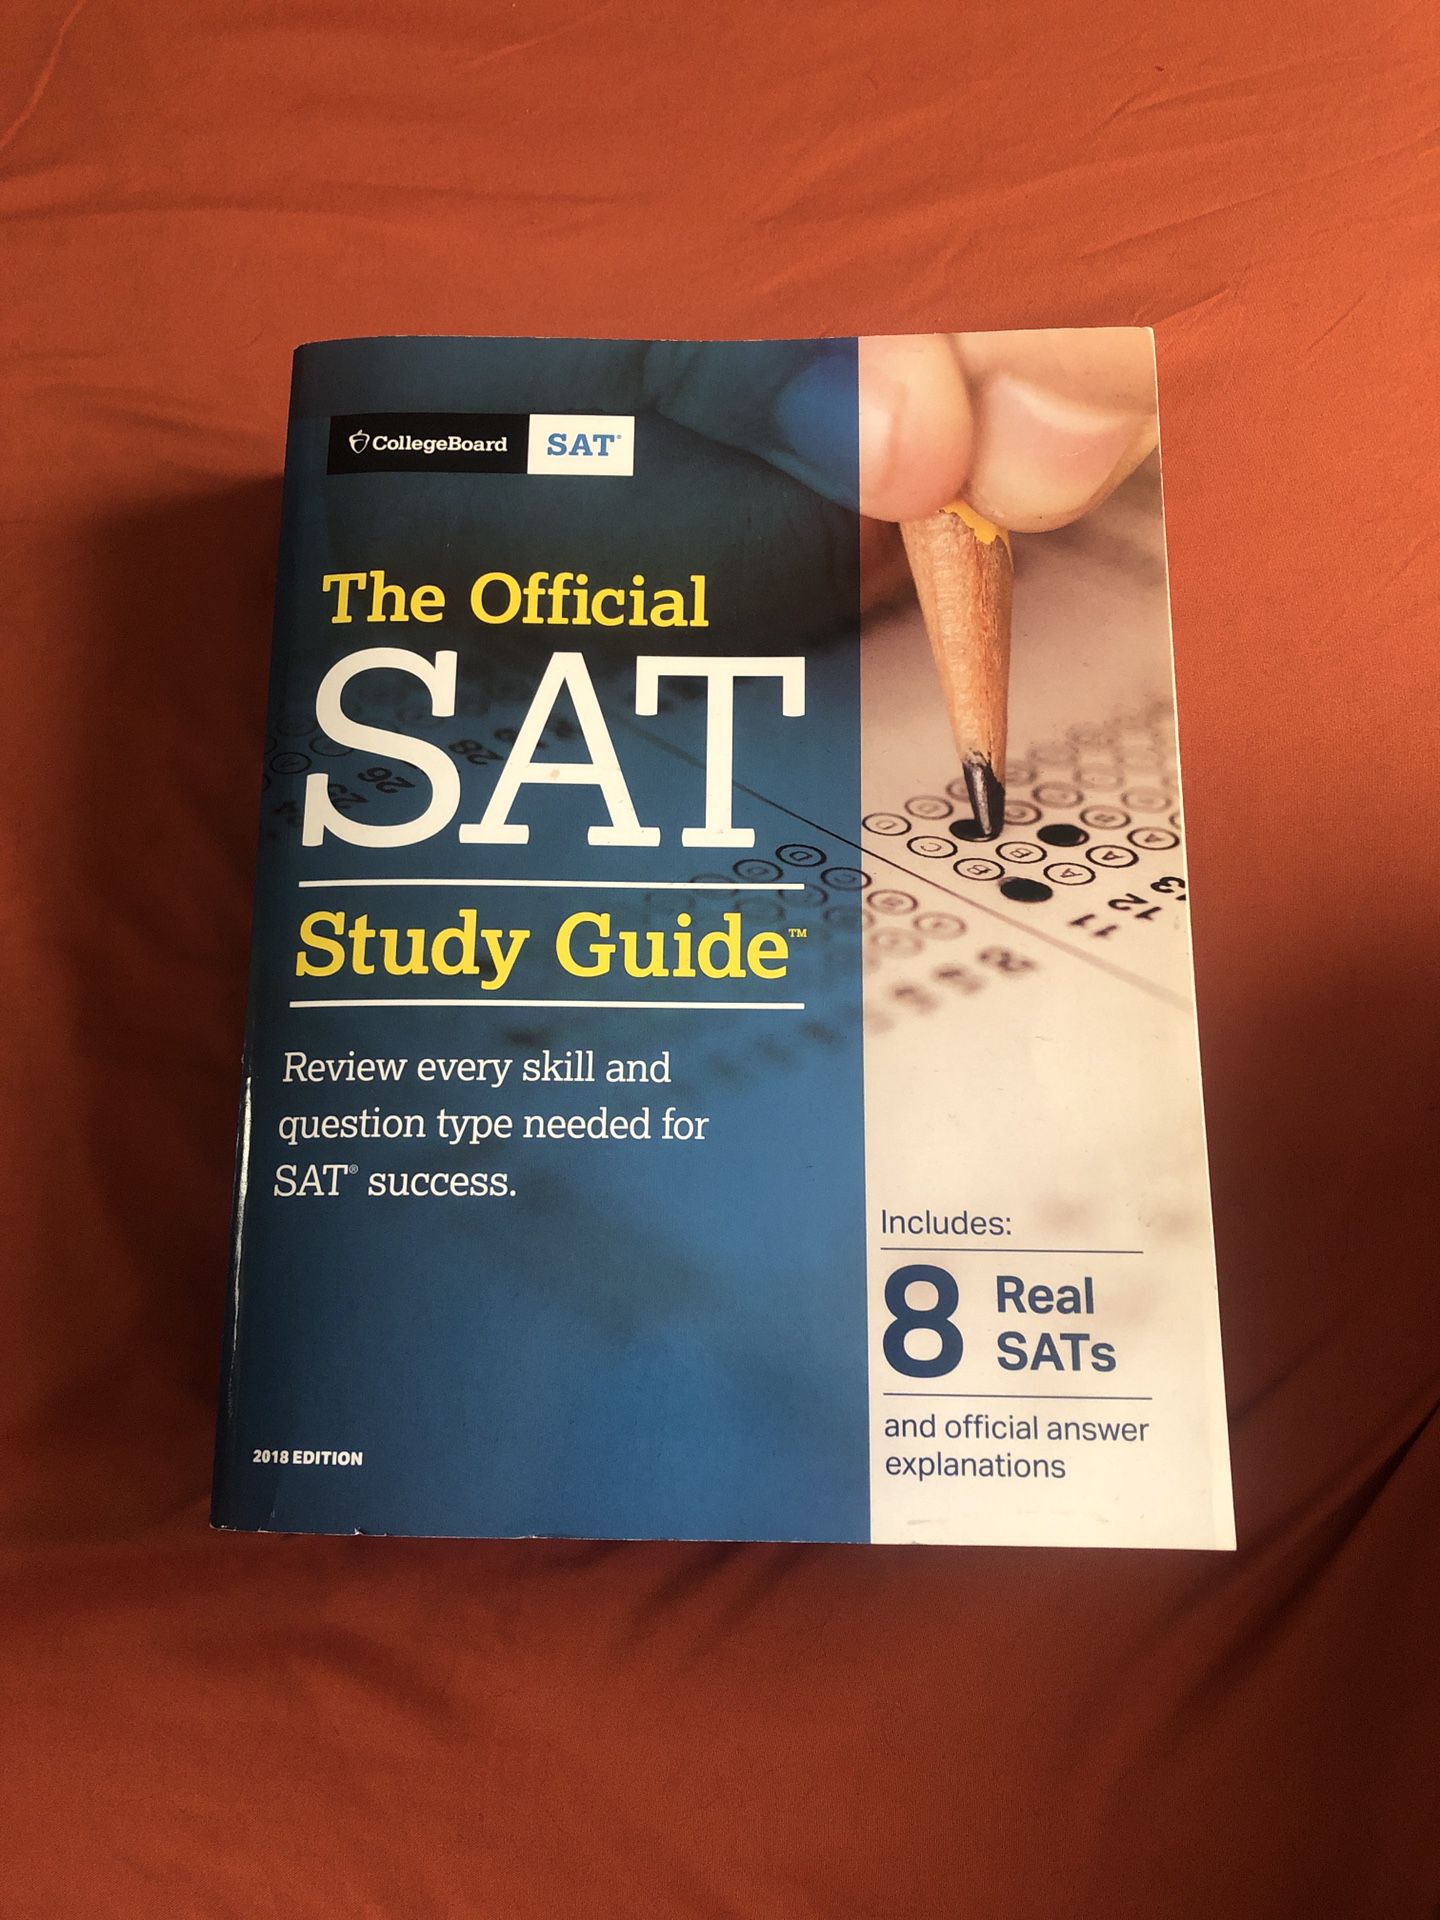 The official SAT book